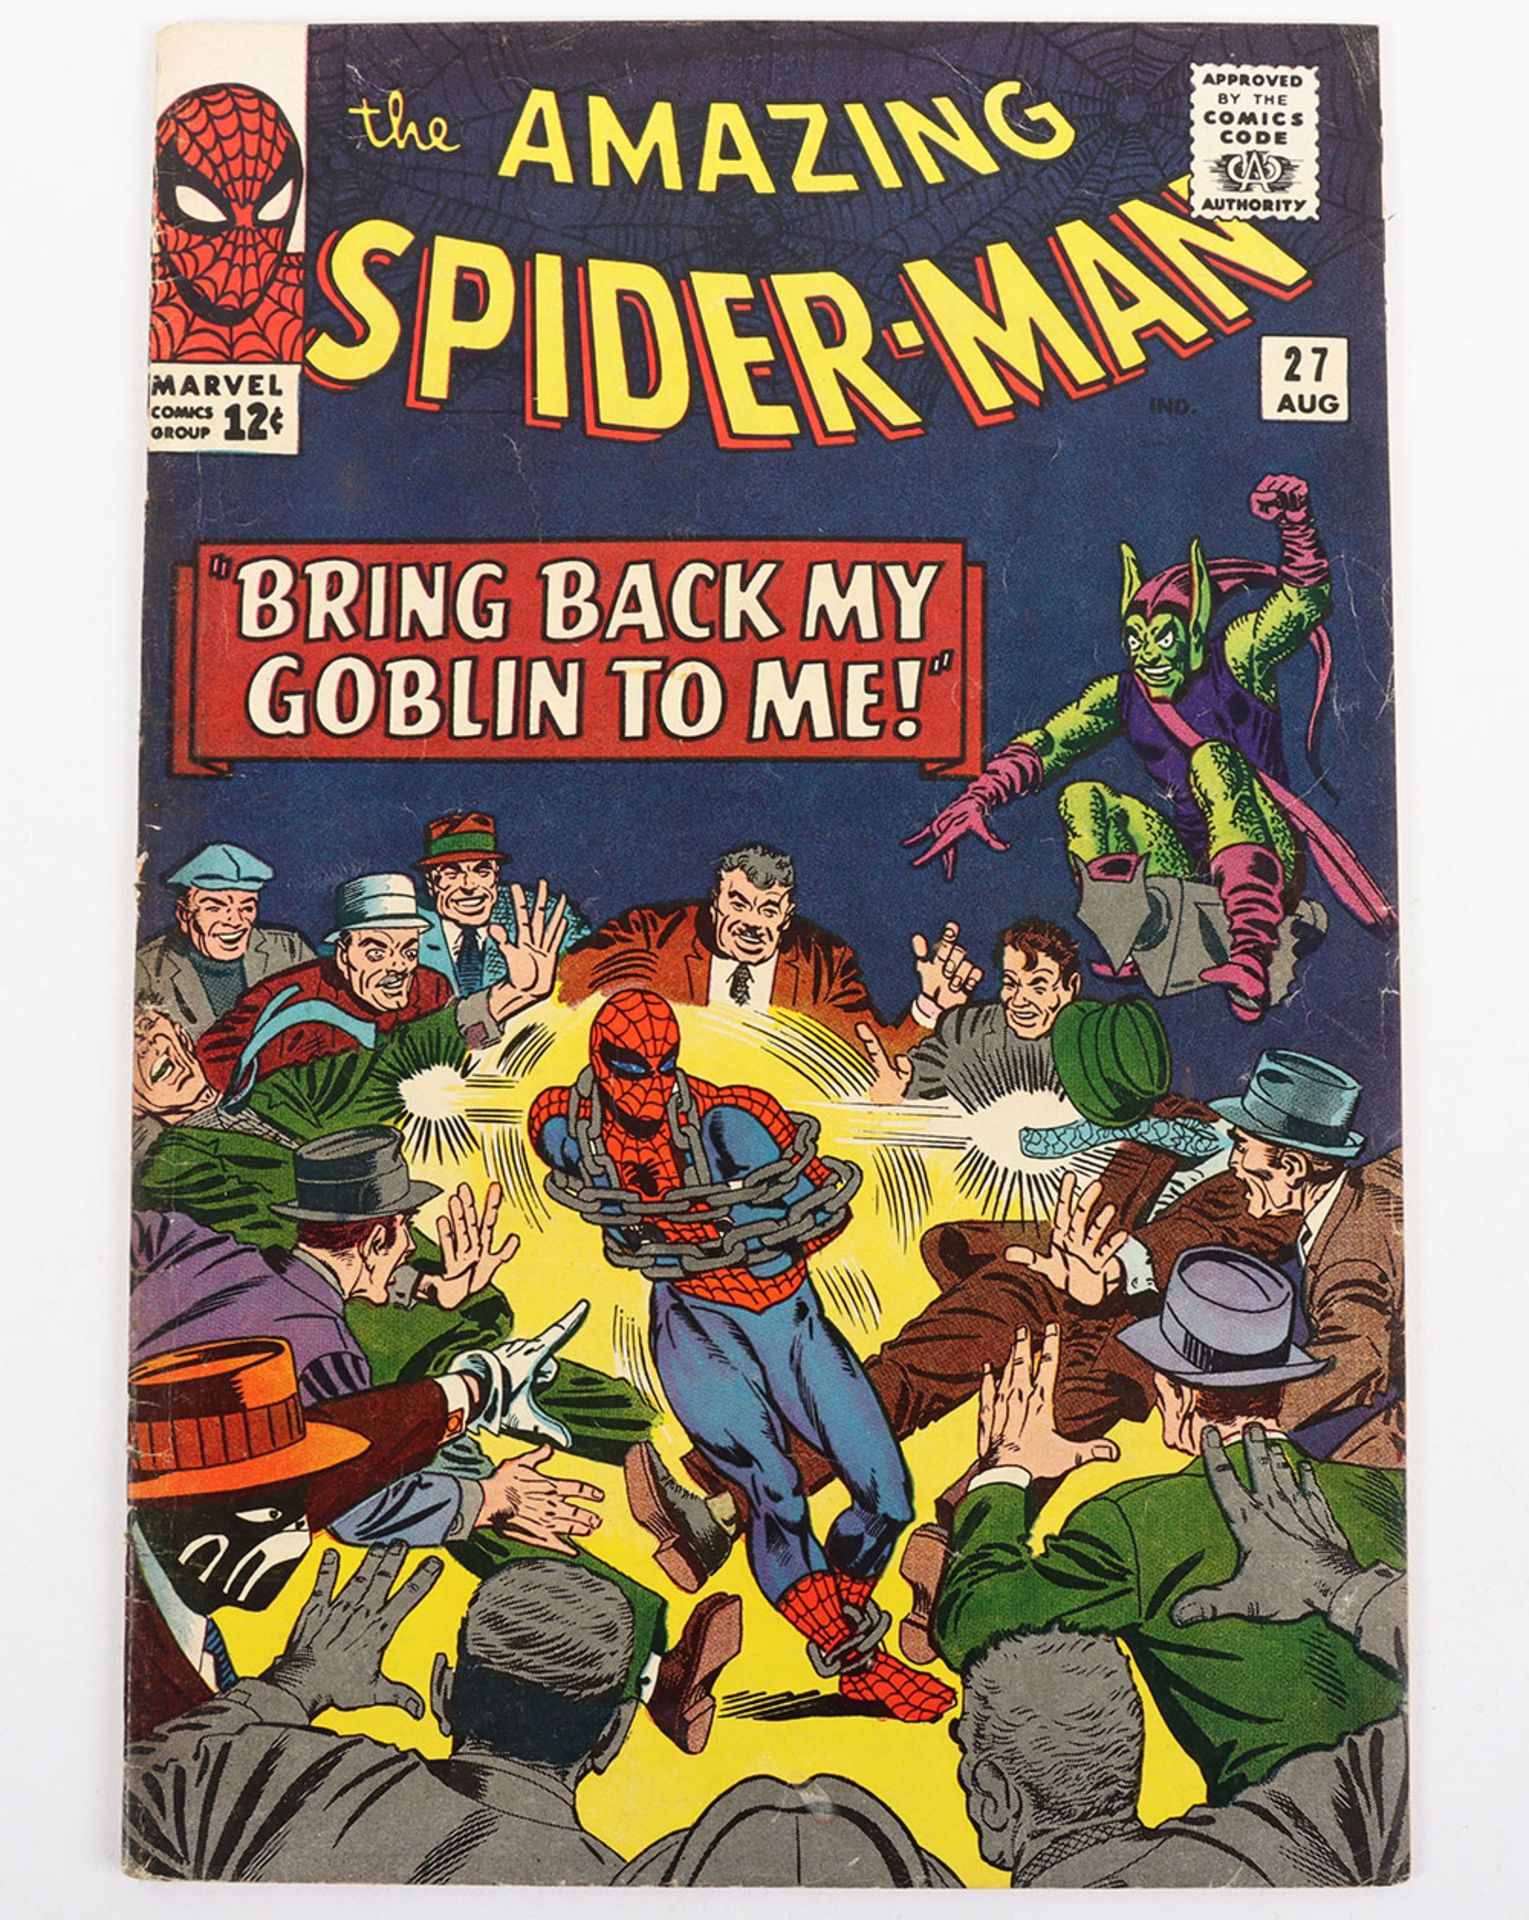 The Amazing Spider-man  No.27  Marvel Silver Age Comic August 1965